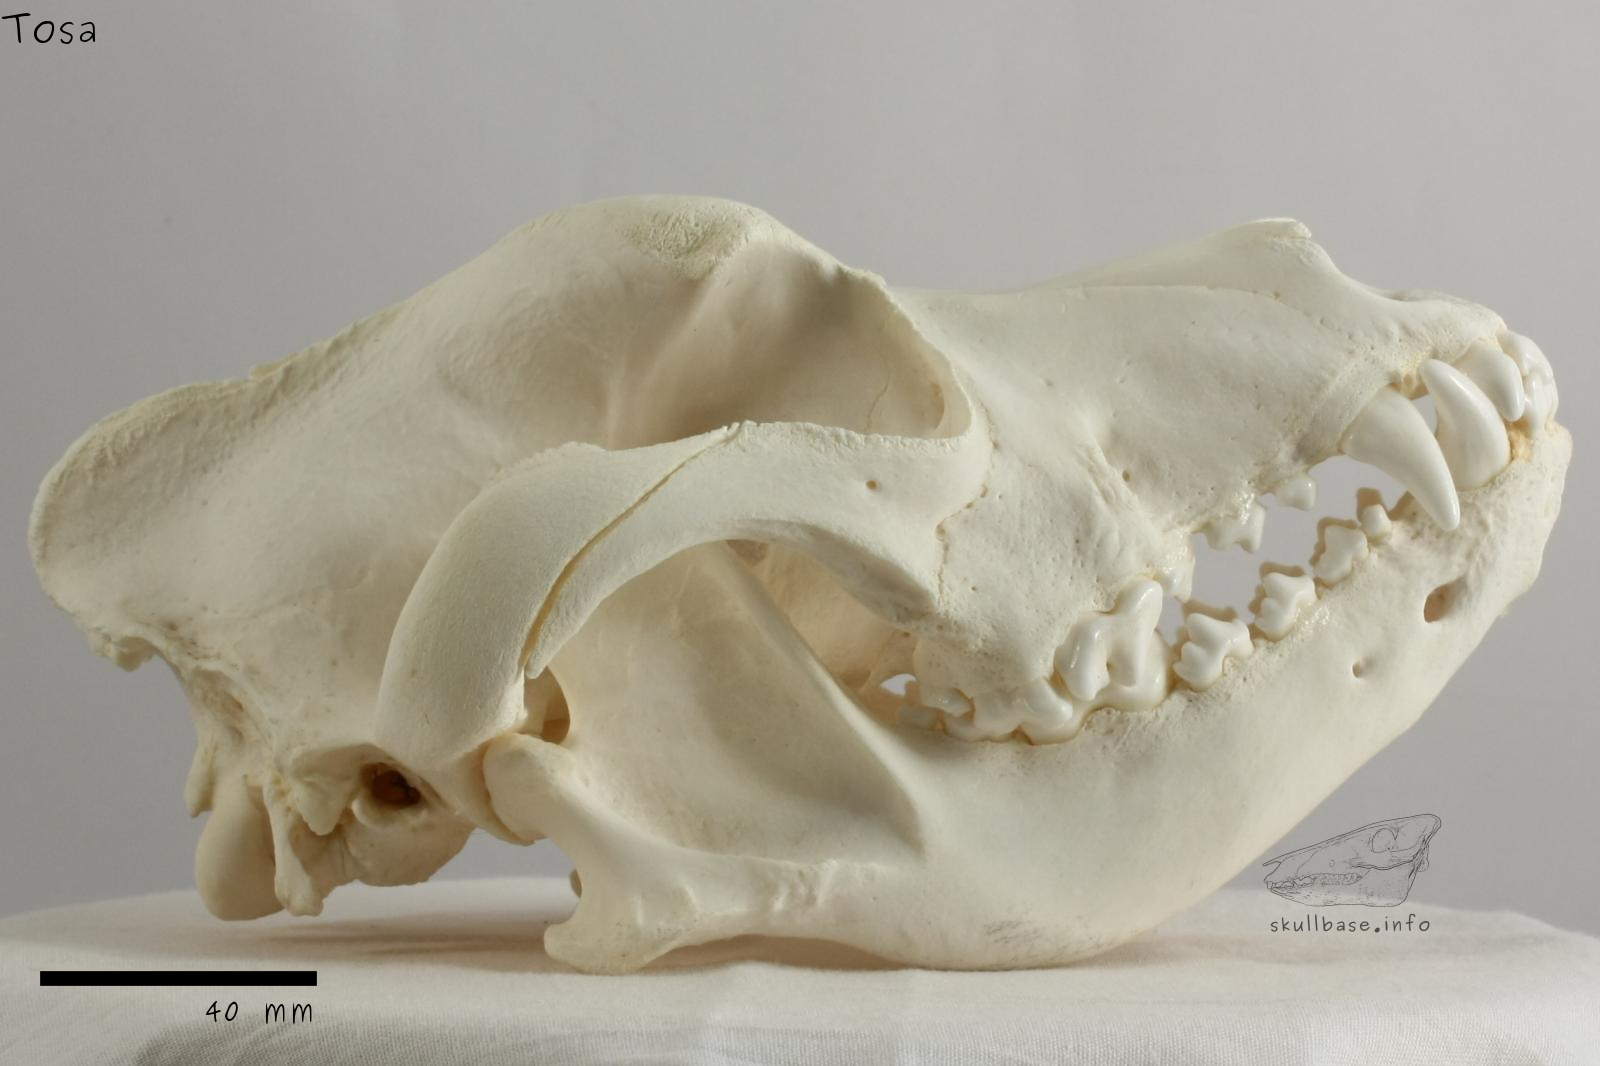 Tosa (Canis lupus familiaris) skull lateral view